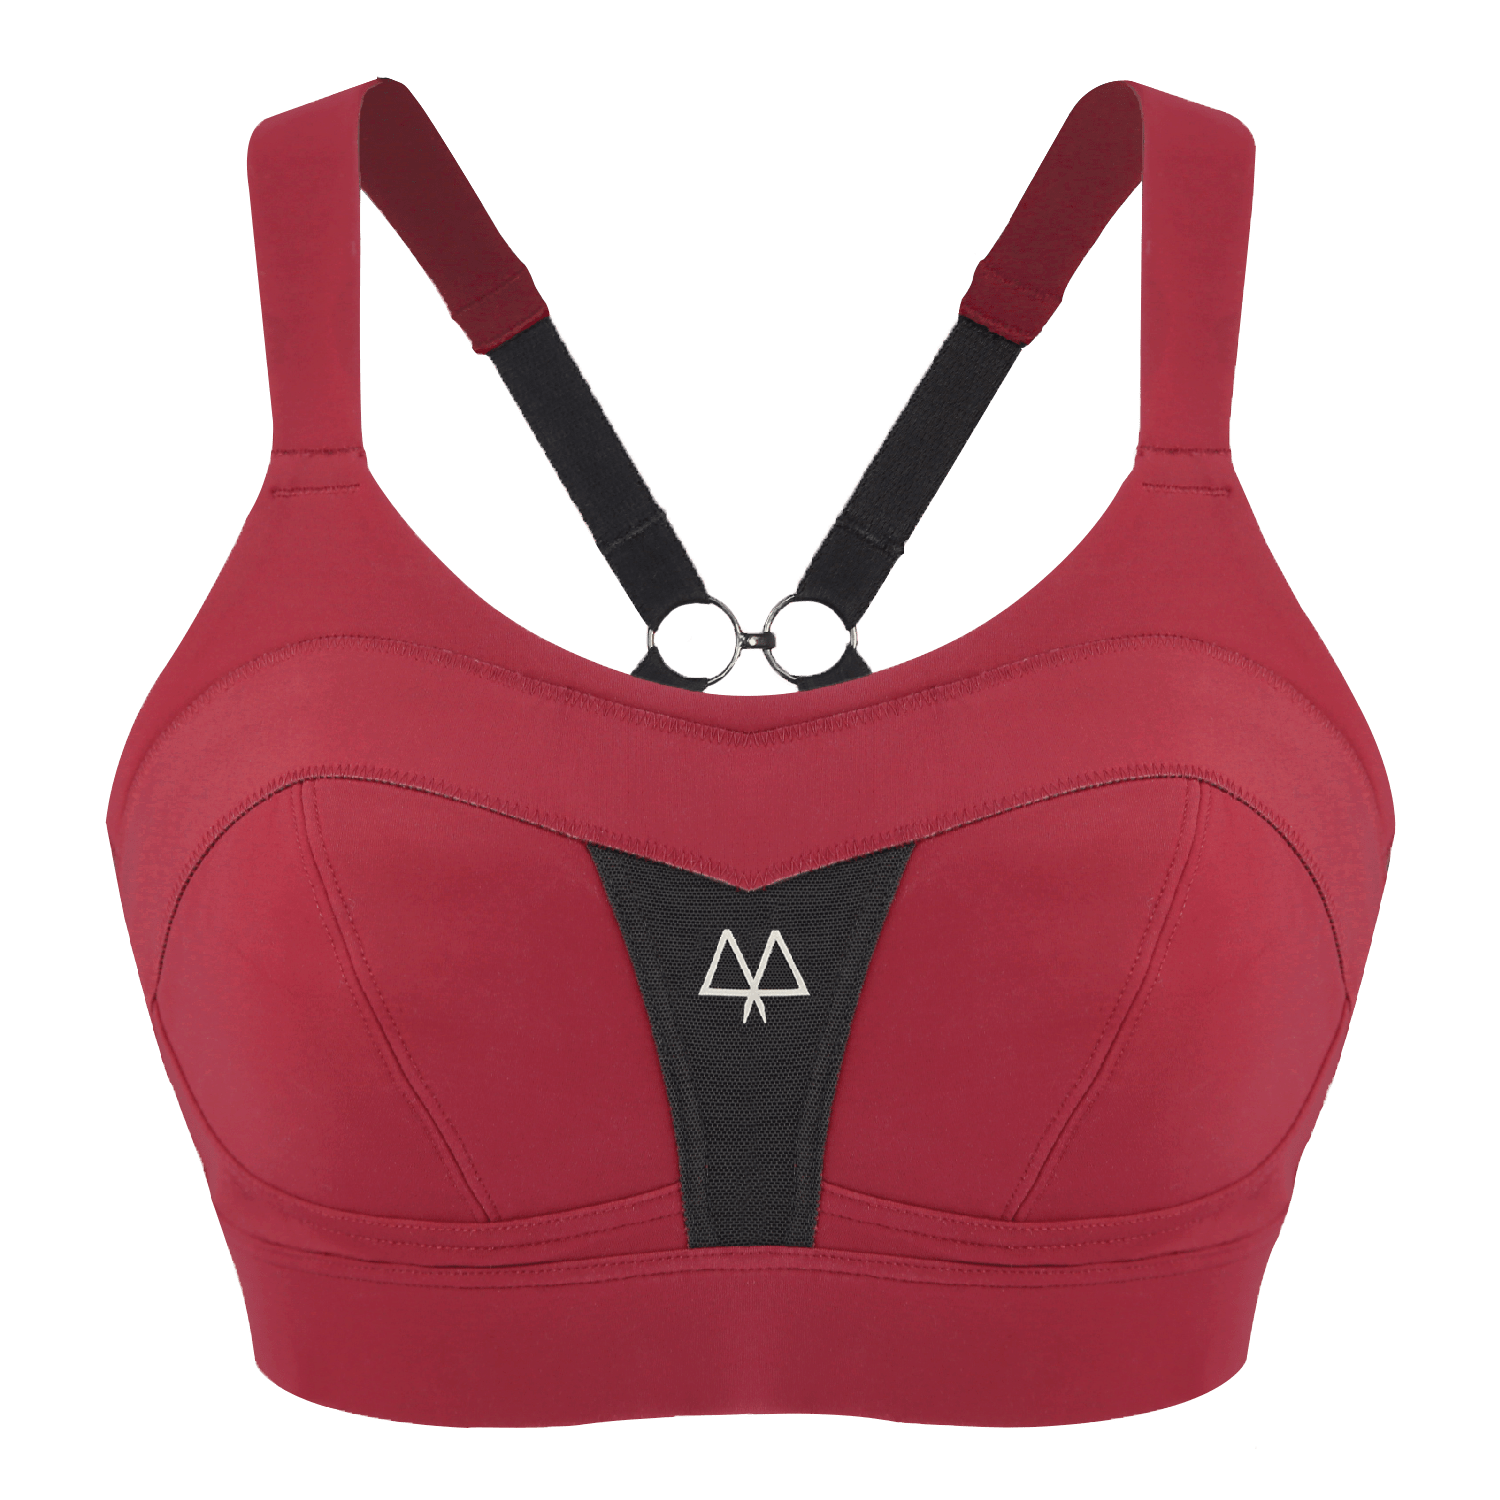 boobydoo - Four reasons why your sports bra is your most important